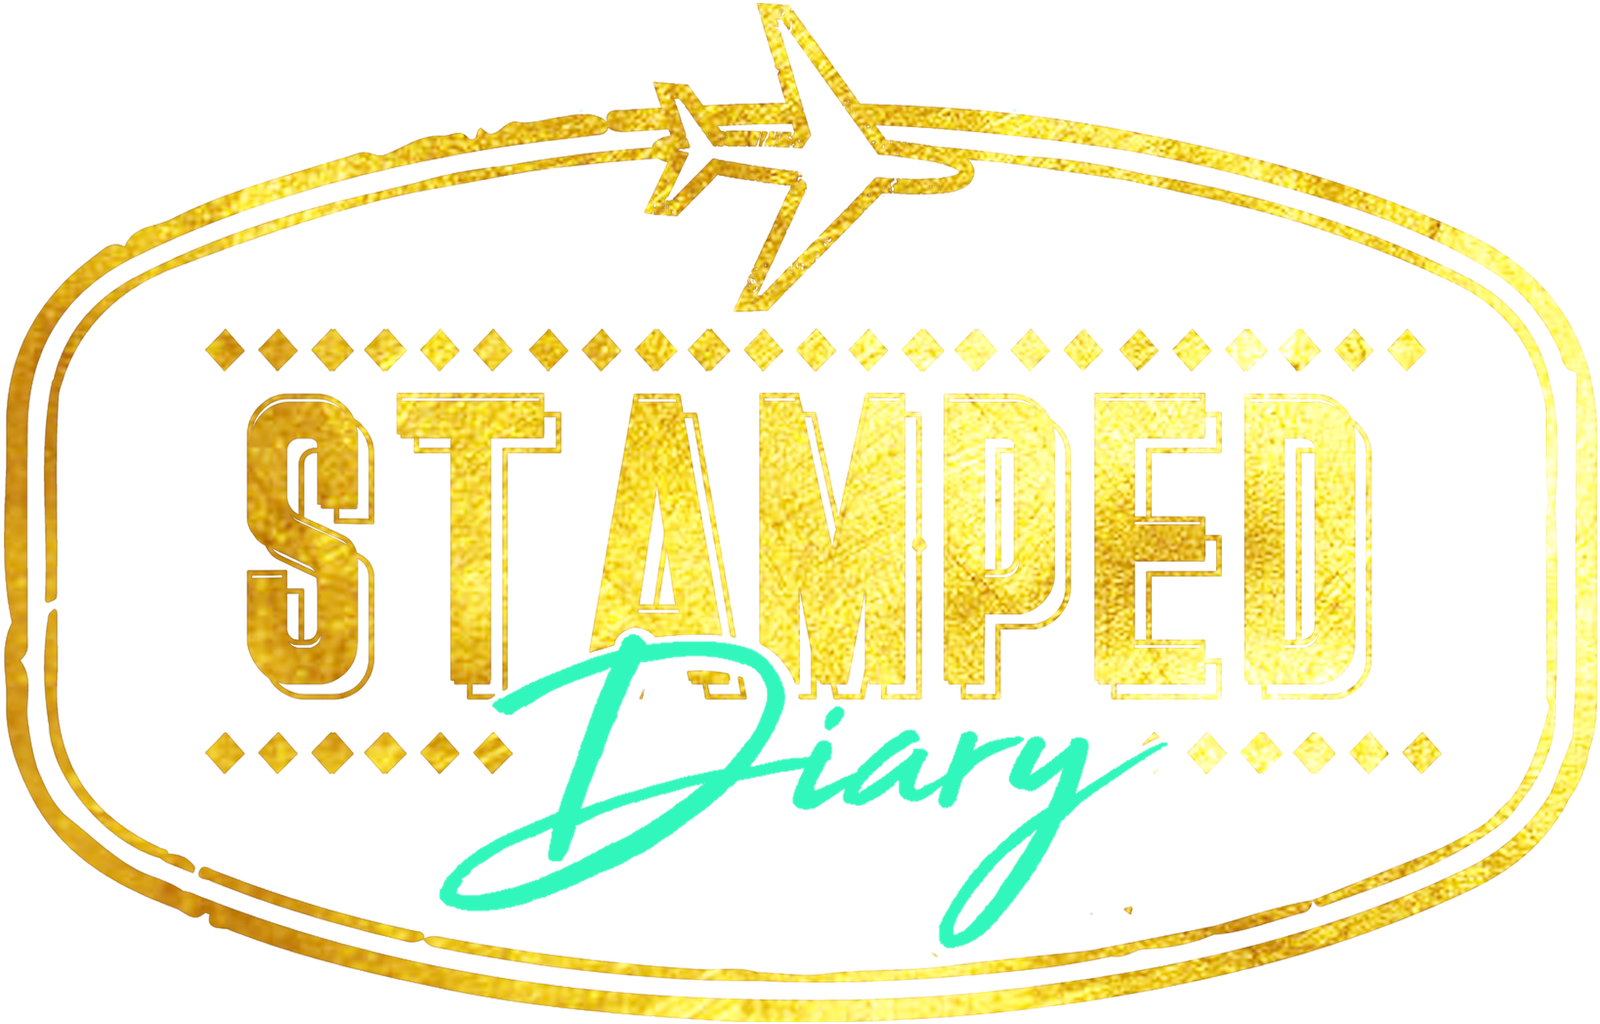 Stamped Diary